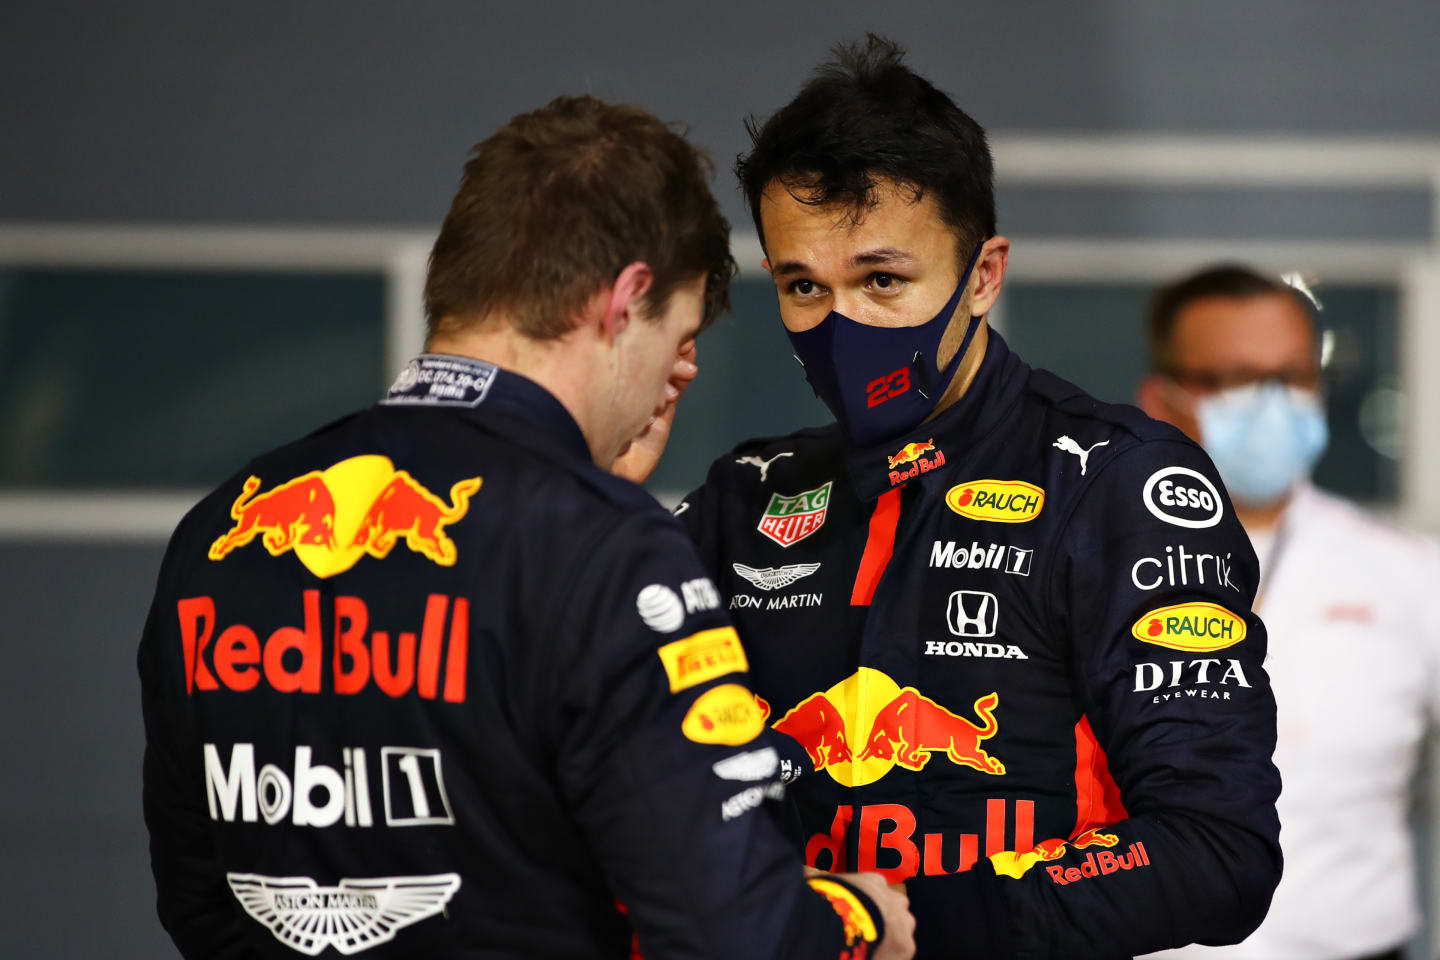 BAHRAIN, BAHRAIN - NOVEMBER 29: Second placed Max Verstappen of Netherlands and Red Bull Racing and third placed Alexander Albon of Thailand and Red Bull Racing celebrate in parc ferme during the F1 Grand Prix of Bahrain at Bahrain International Circuit on November 29, 2020 in Bahrain, Bahrain. (Photo by Mark Thompson/Getty Images)